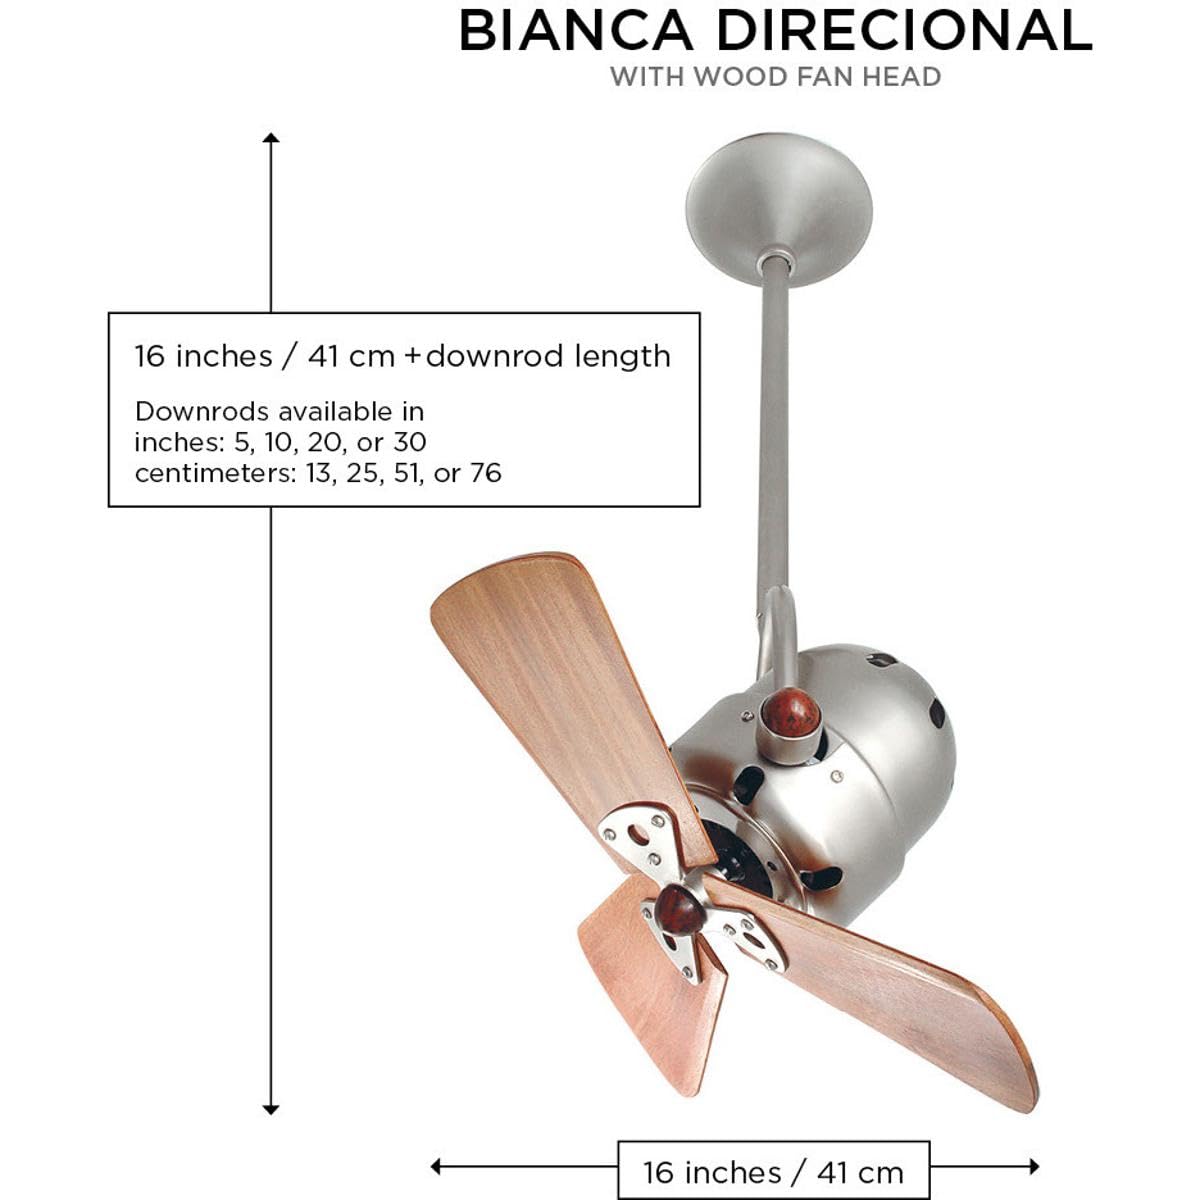 Matthews Fan BD-CR-WD Bianca Direcional ceiling fan in Polished Chrome finish with solid sustainable mahogany wood blades.